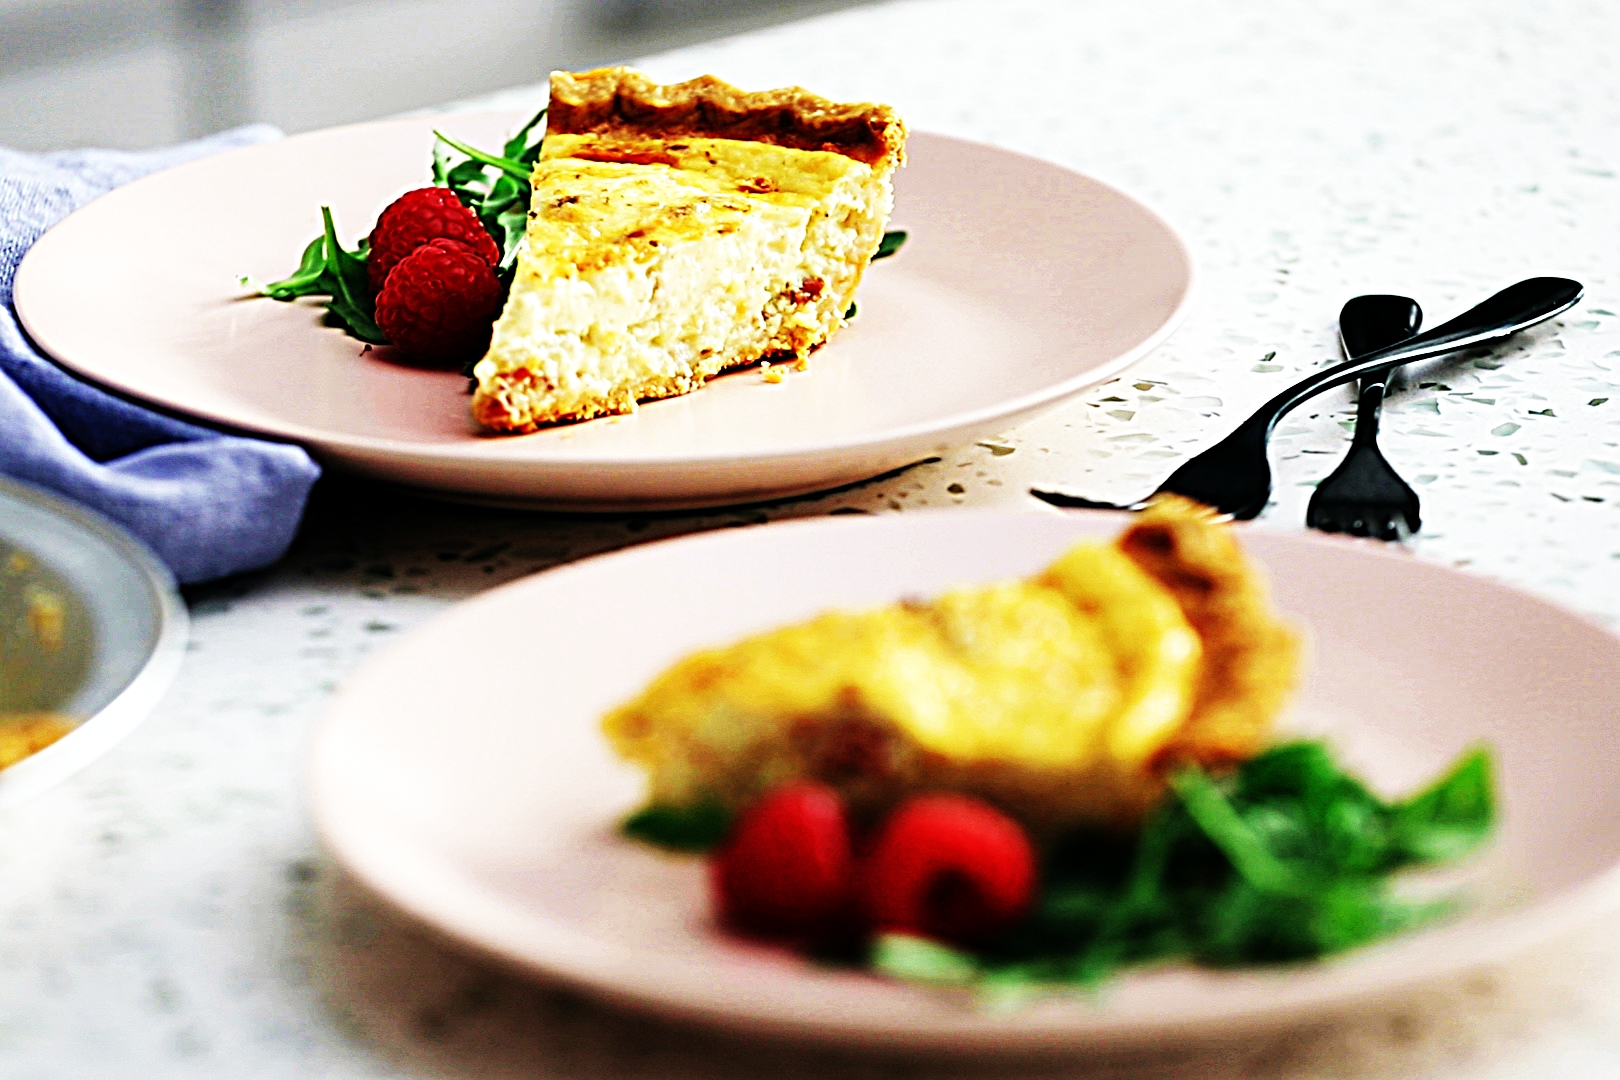 Stupid-Easy Recipe for Quiche Lorraine (#1 Top-Rated)